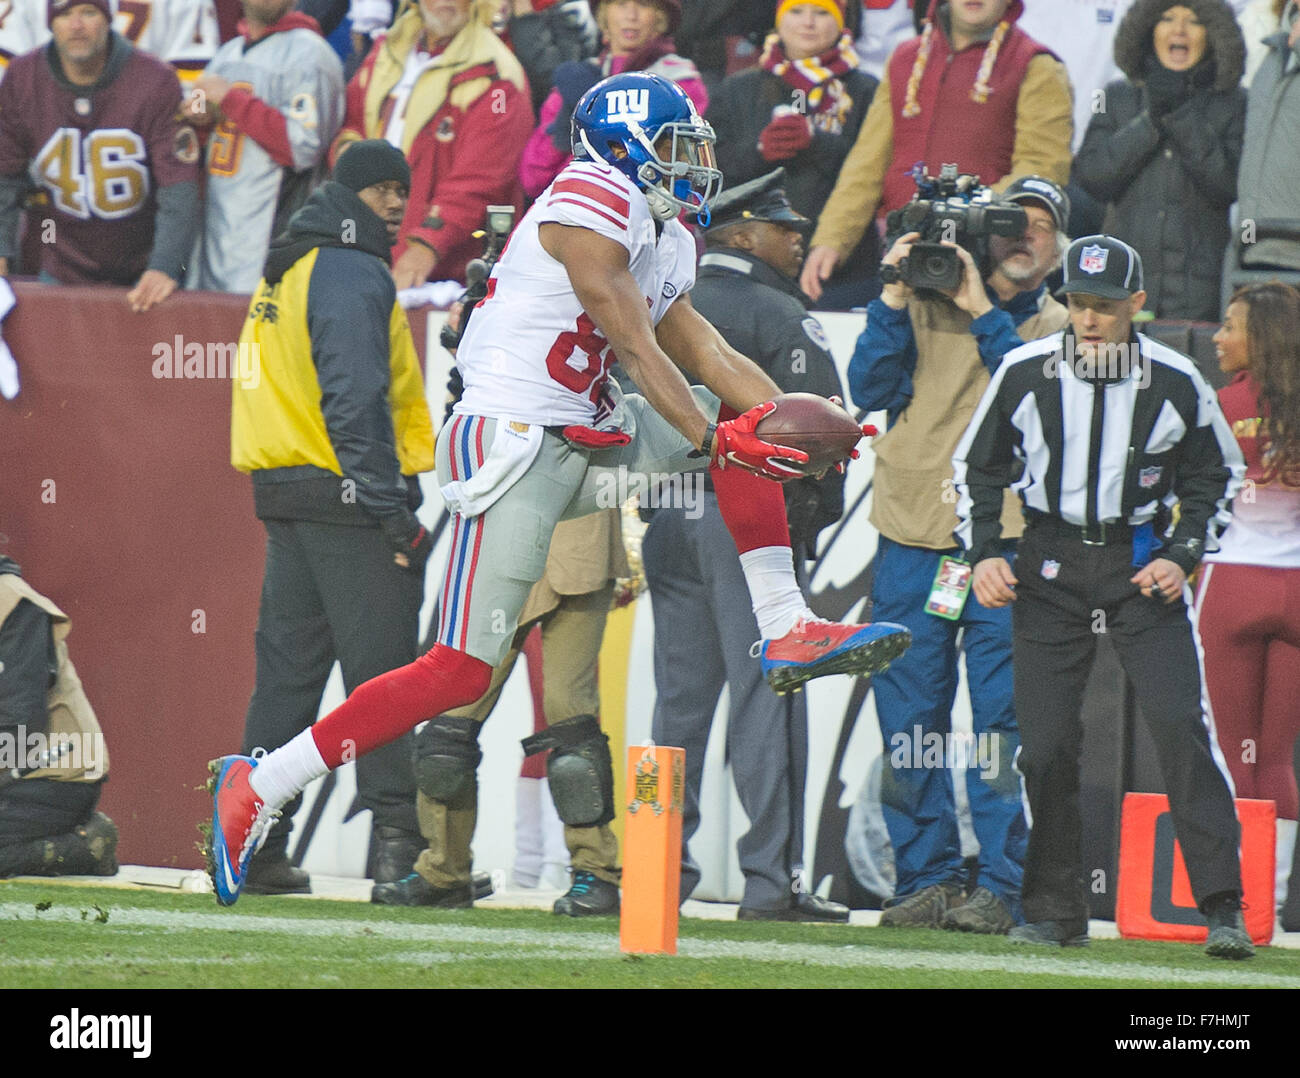 New York Giants wide receiver Rueben Randle (82) catches an Eli Manning pass for a touchdown in the fourth quarter against the Washington Redskins at FedEx Field in Landover, Maryland on Sunday, November 29, 2015. The Redskins won the game 20-14. Credit: Ron Sachs / CNP (RESTRICTION: NO New York or New Jersey Newspapers or newspapers within a 75 mile radius of New York City)   - NO WIRE SERVICE - Stock Photo